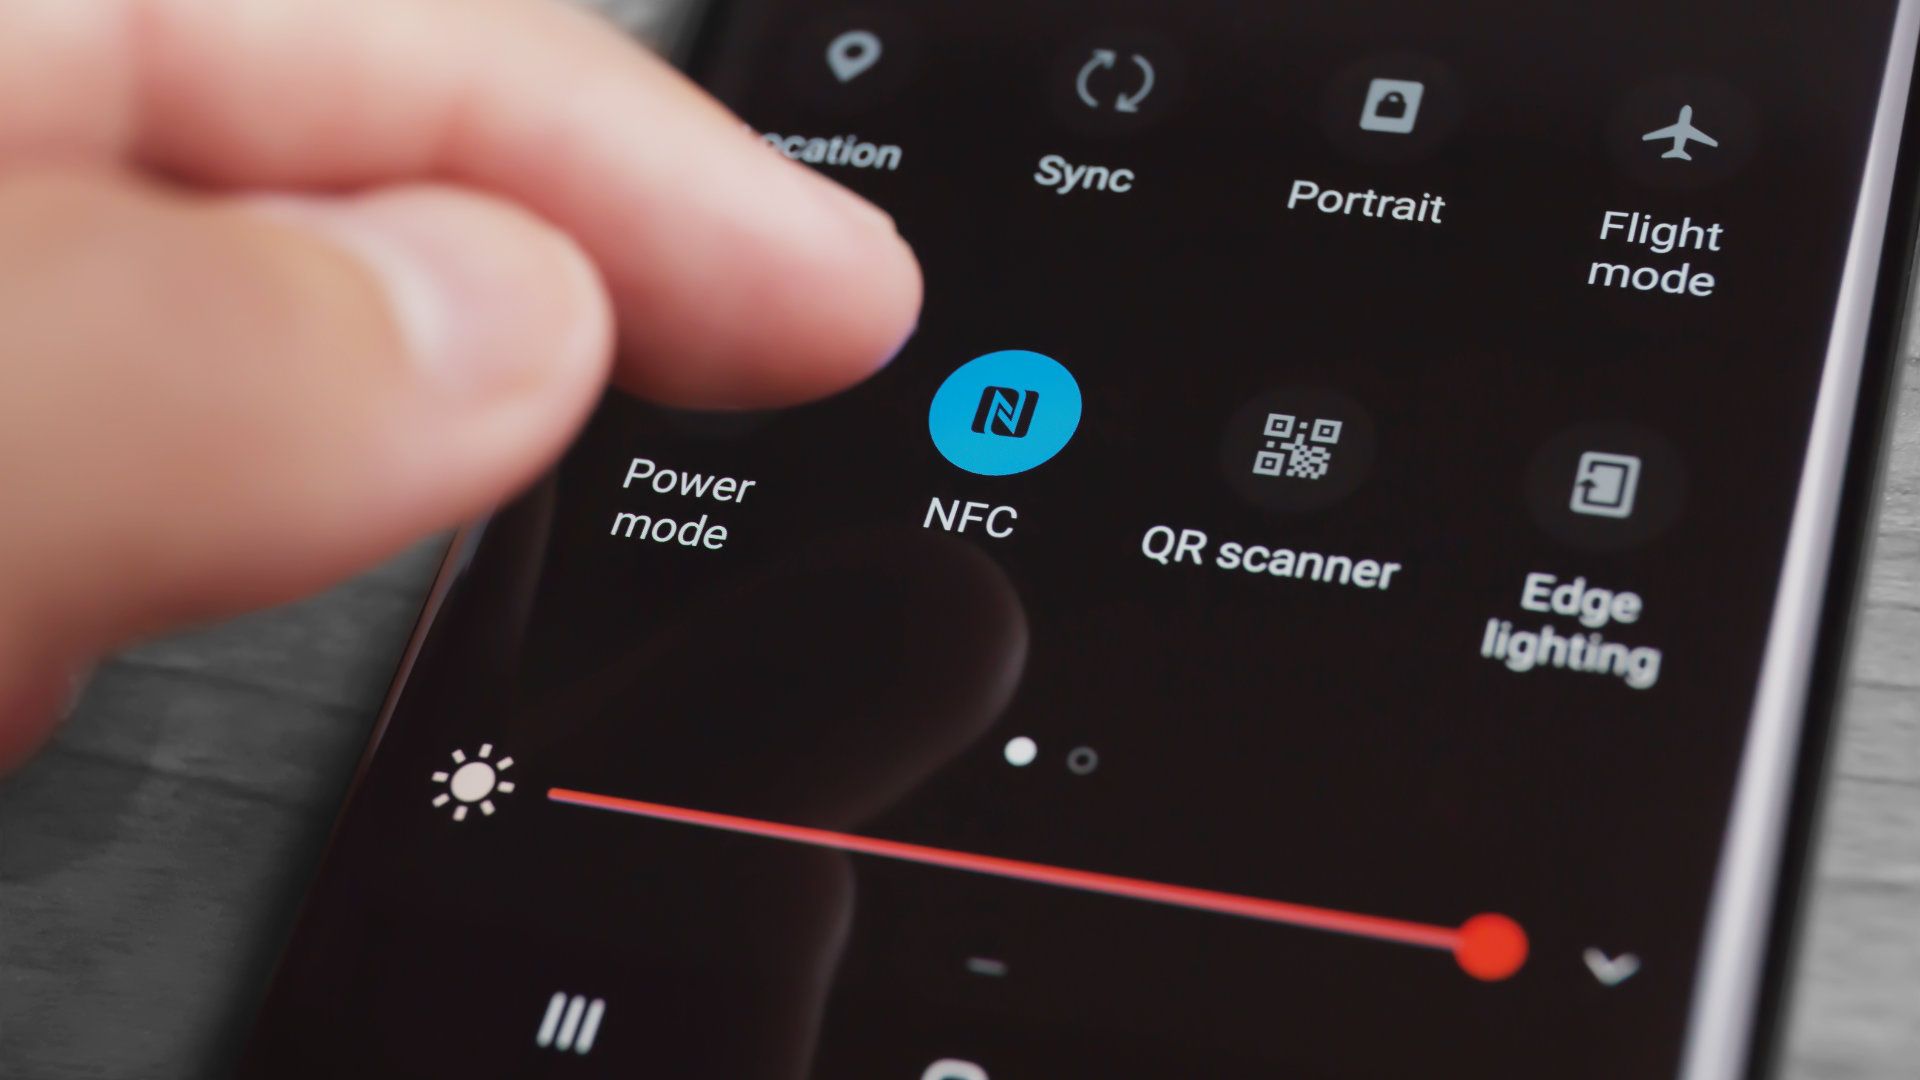 How To Turn On NFC on Android